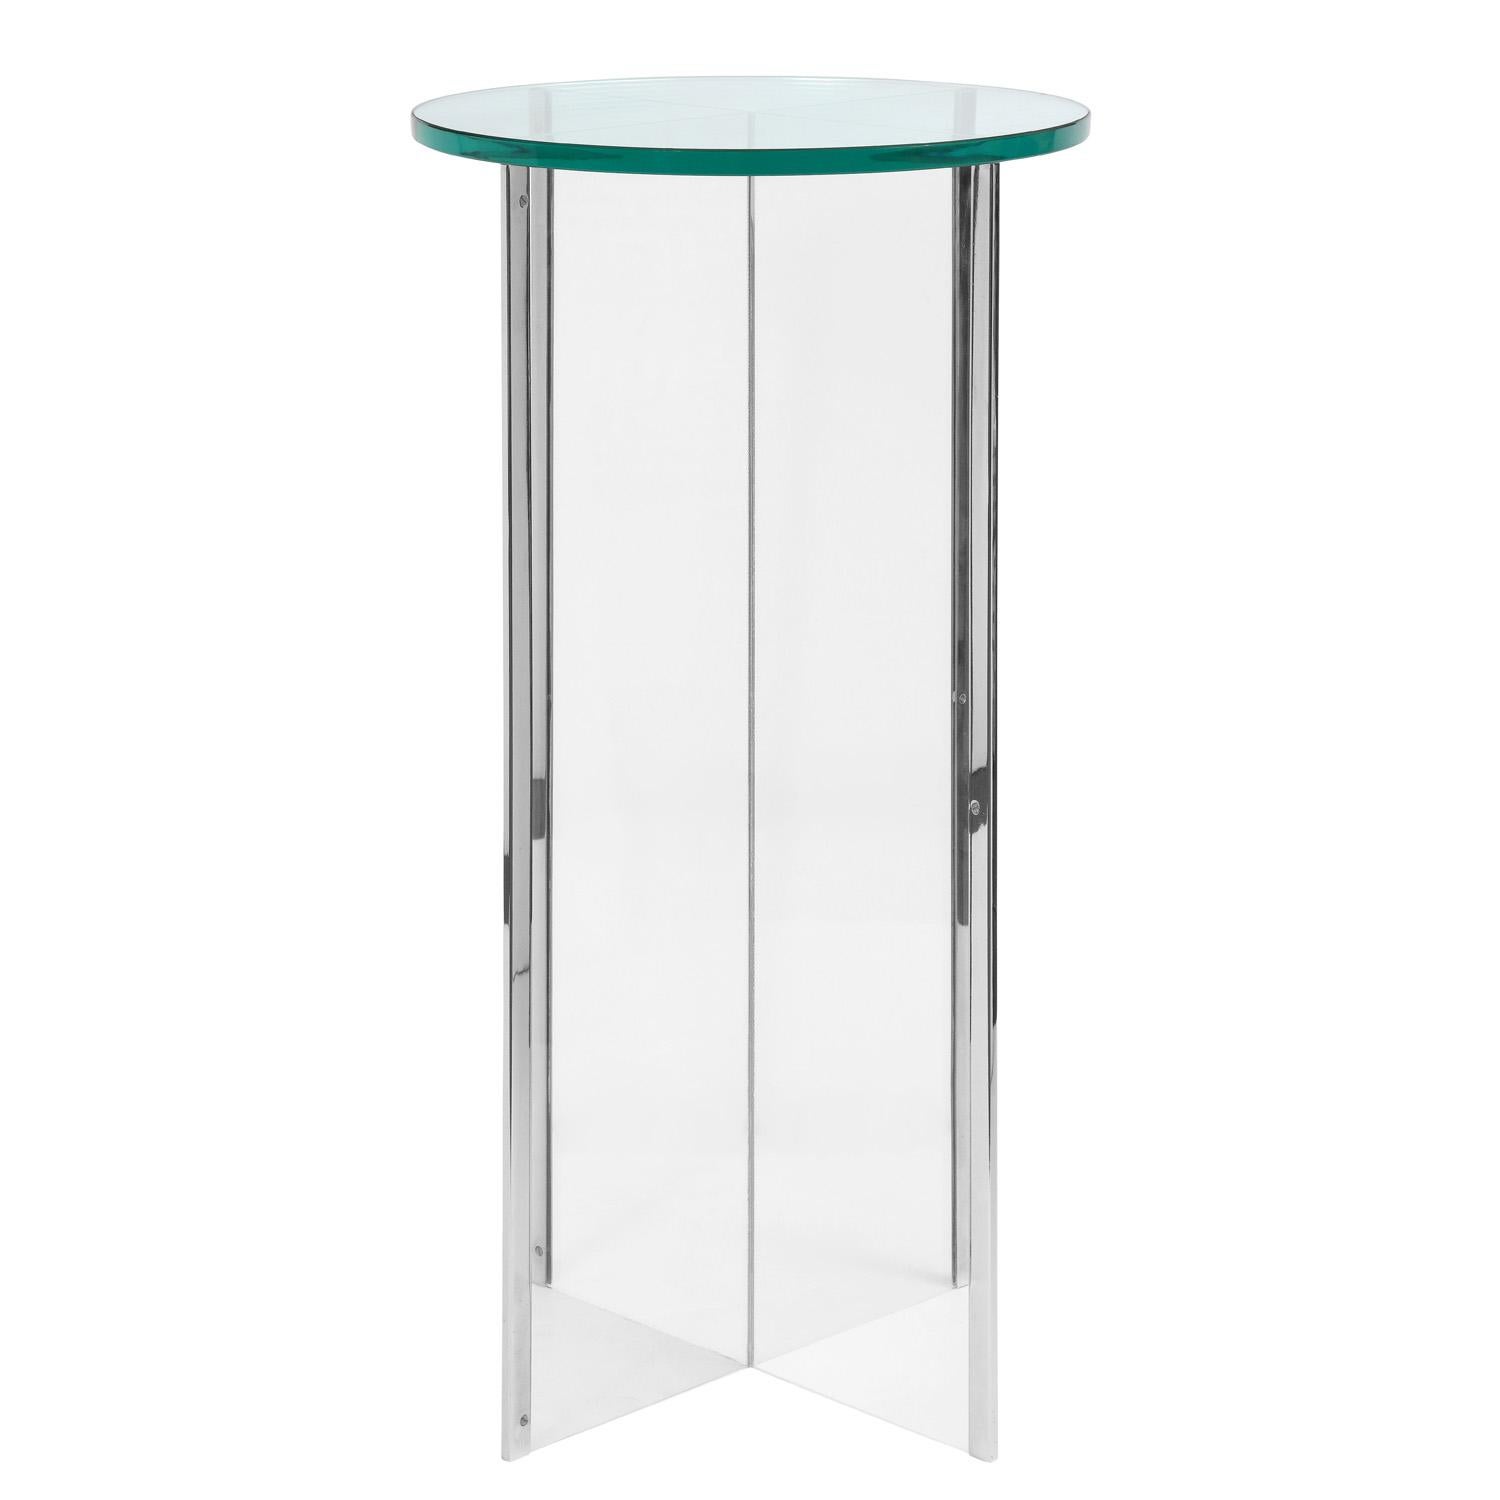 Pedestal in lucite with polished chrome trim and thick glass top, American 1970's.